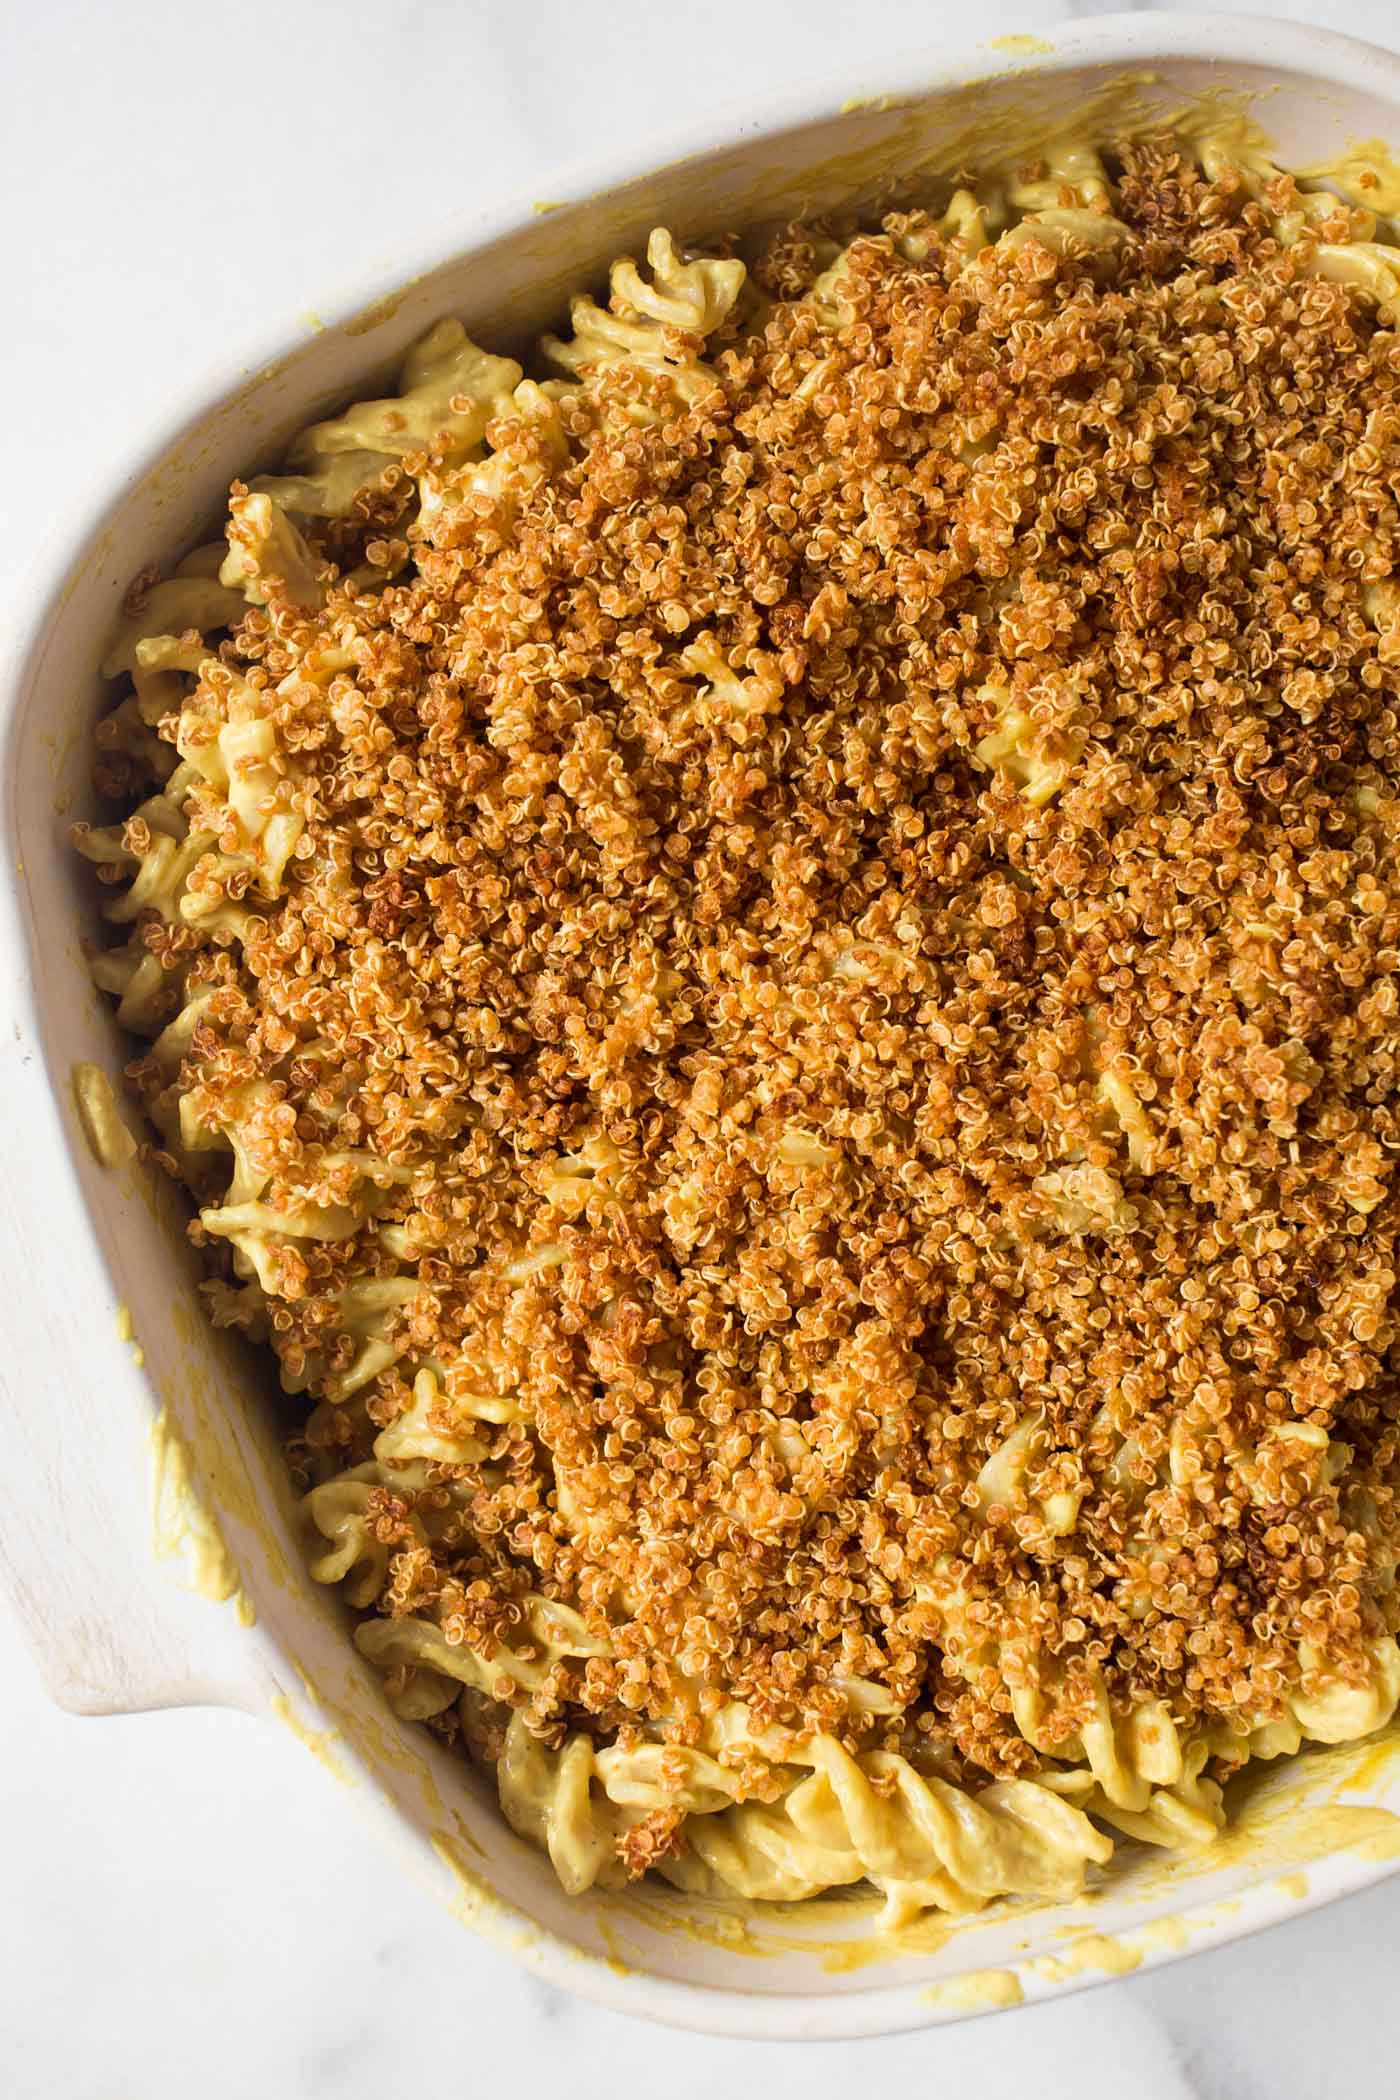 Baked VEGAN Mac and Cheese with a dreamy "cheese" sauce and a crunchy quinoa topping!